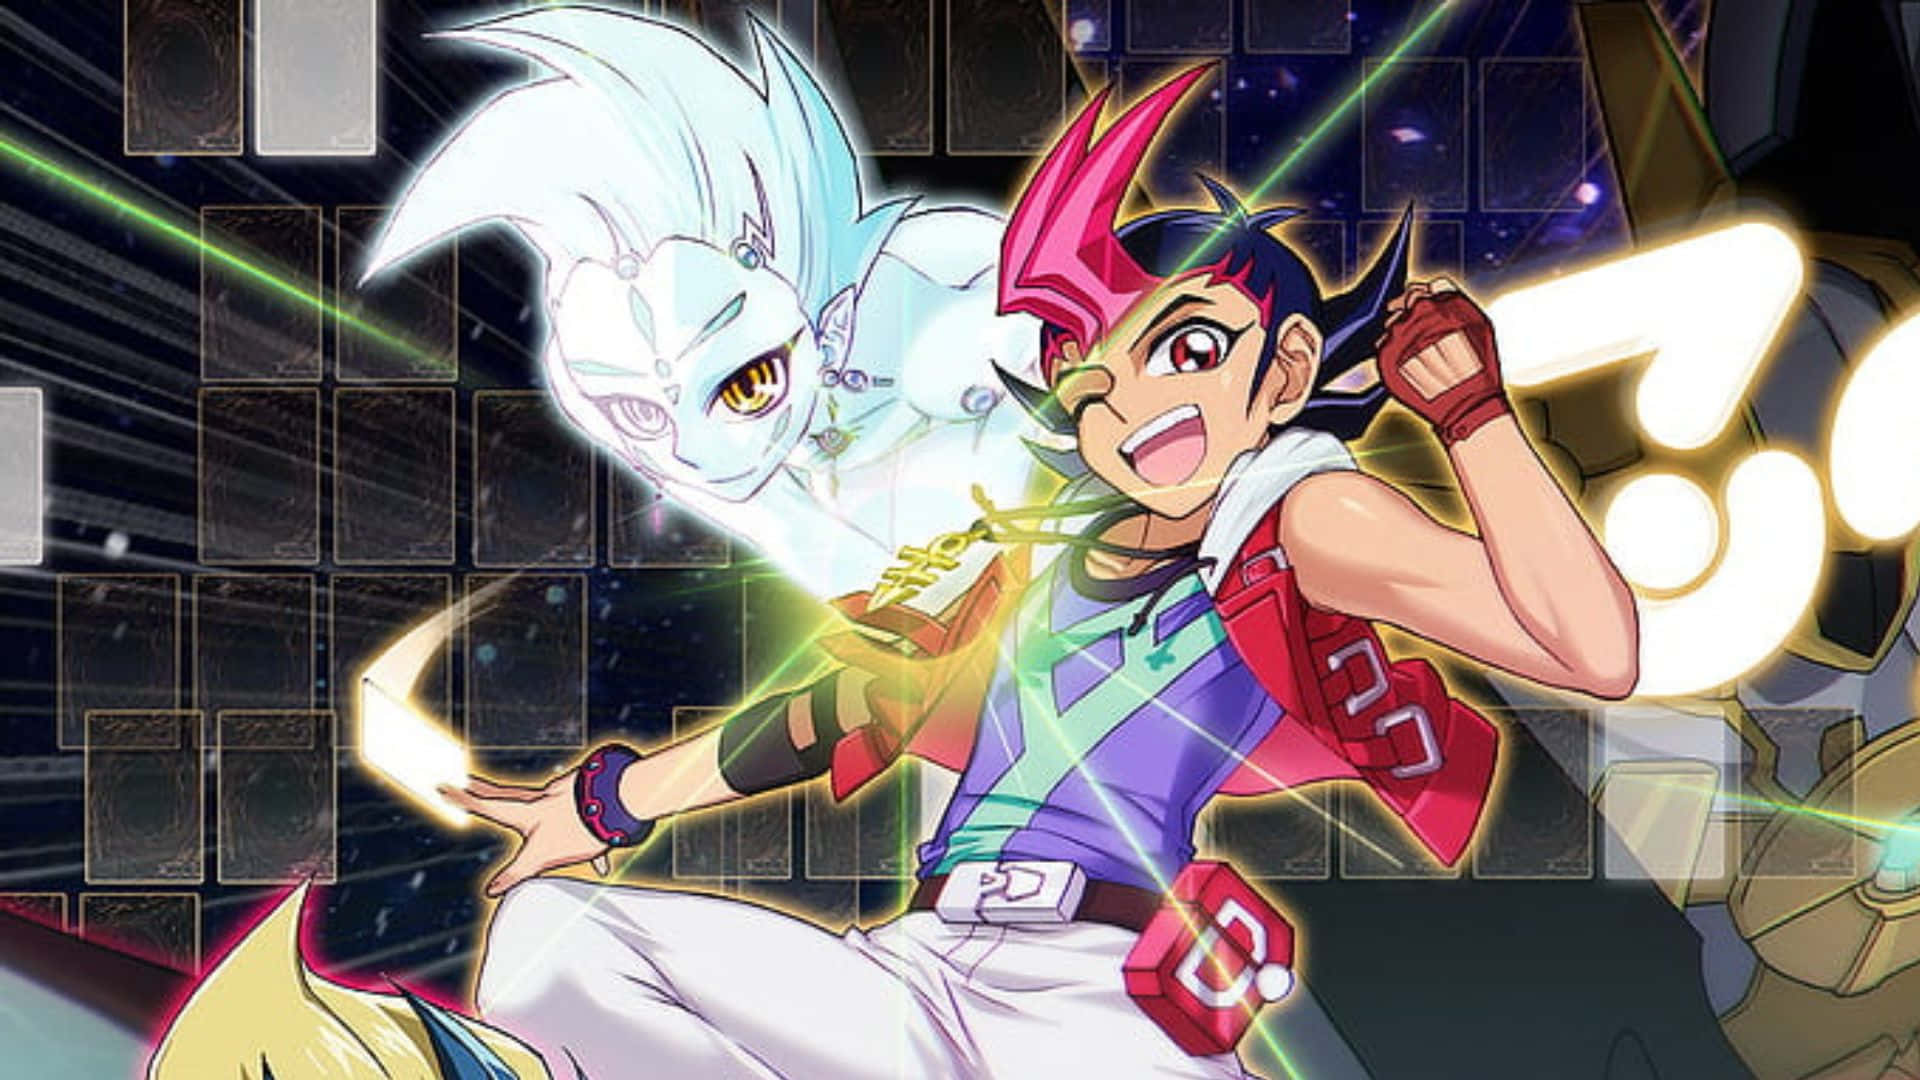 Yu-Gi-Oh! ZEXAL - Astral and Yuma engaged in a dynamic duel Wallpaper